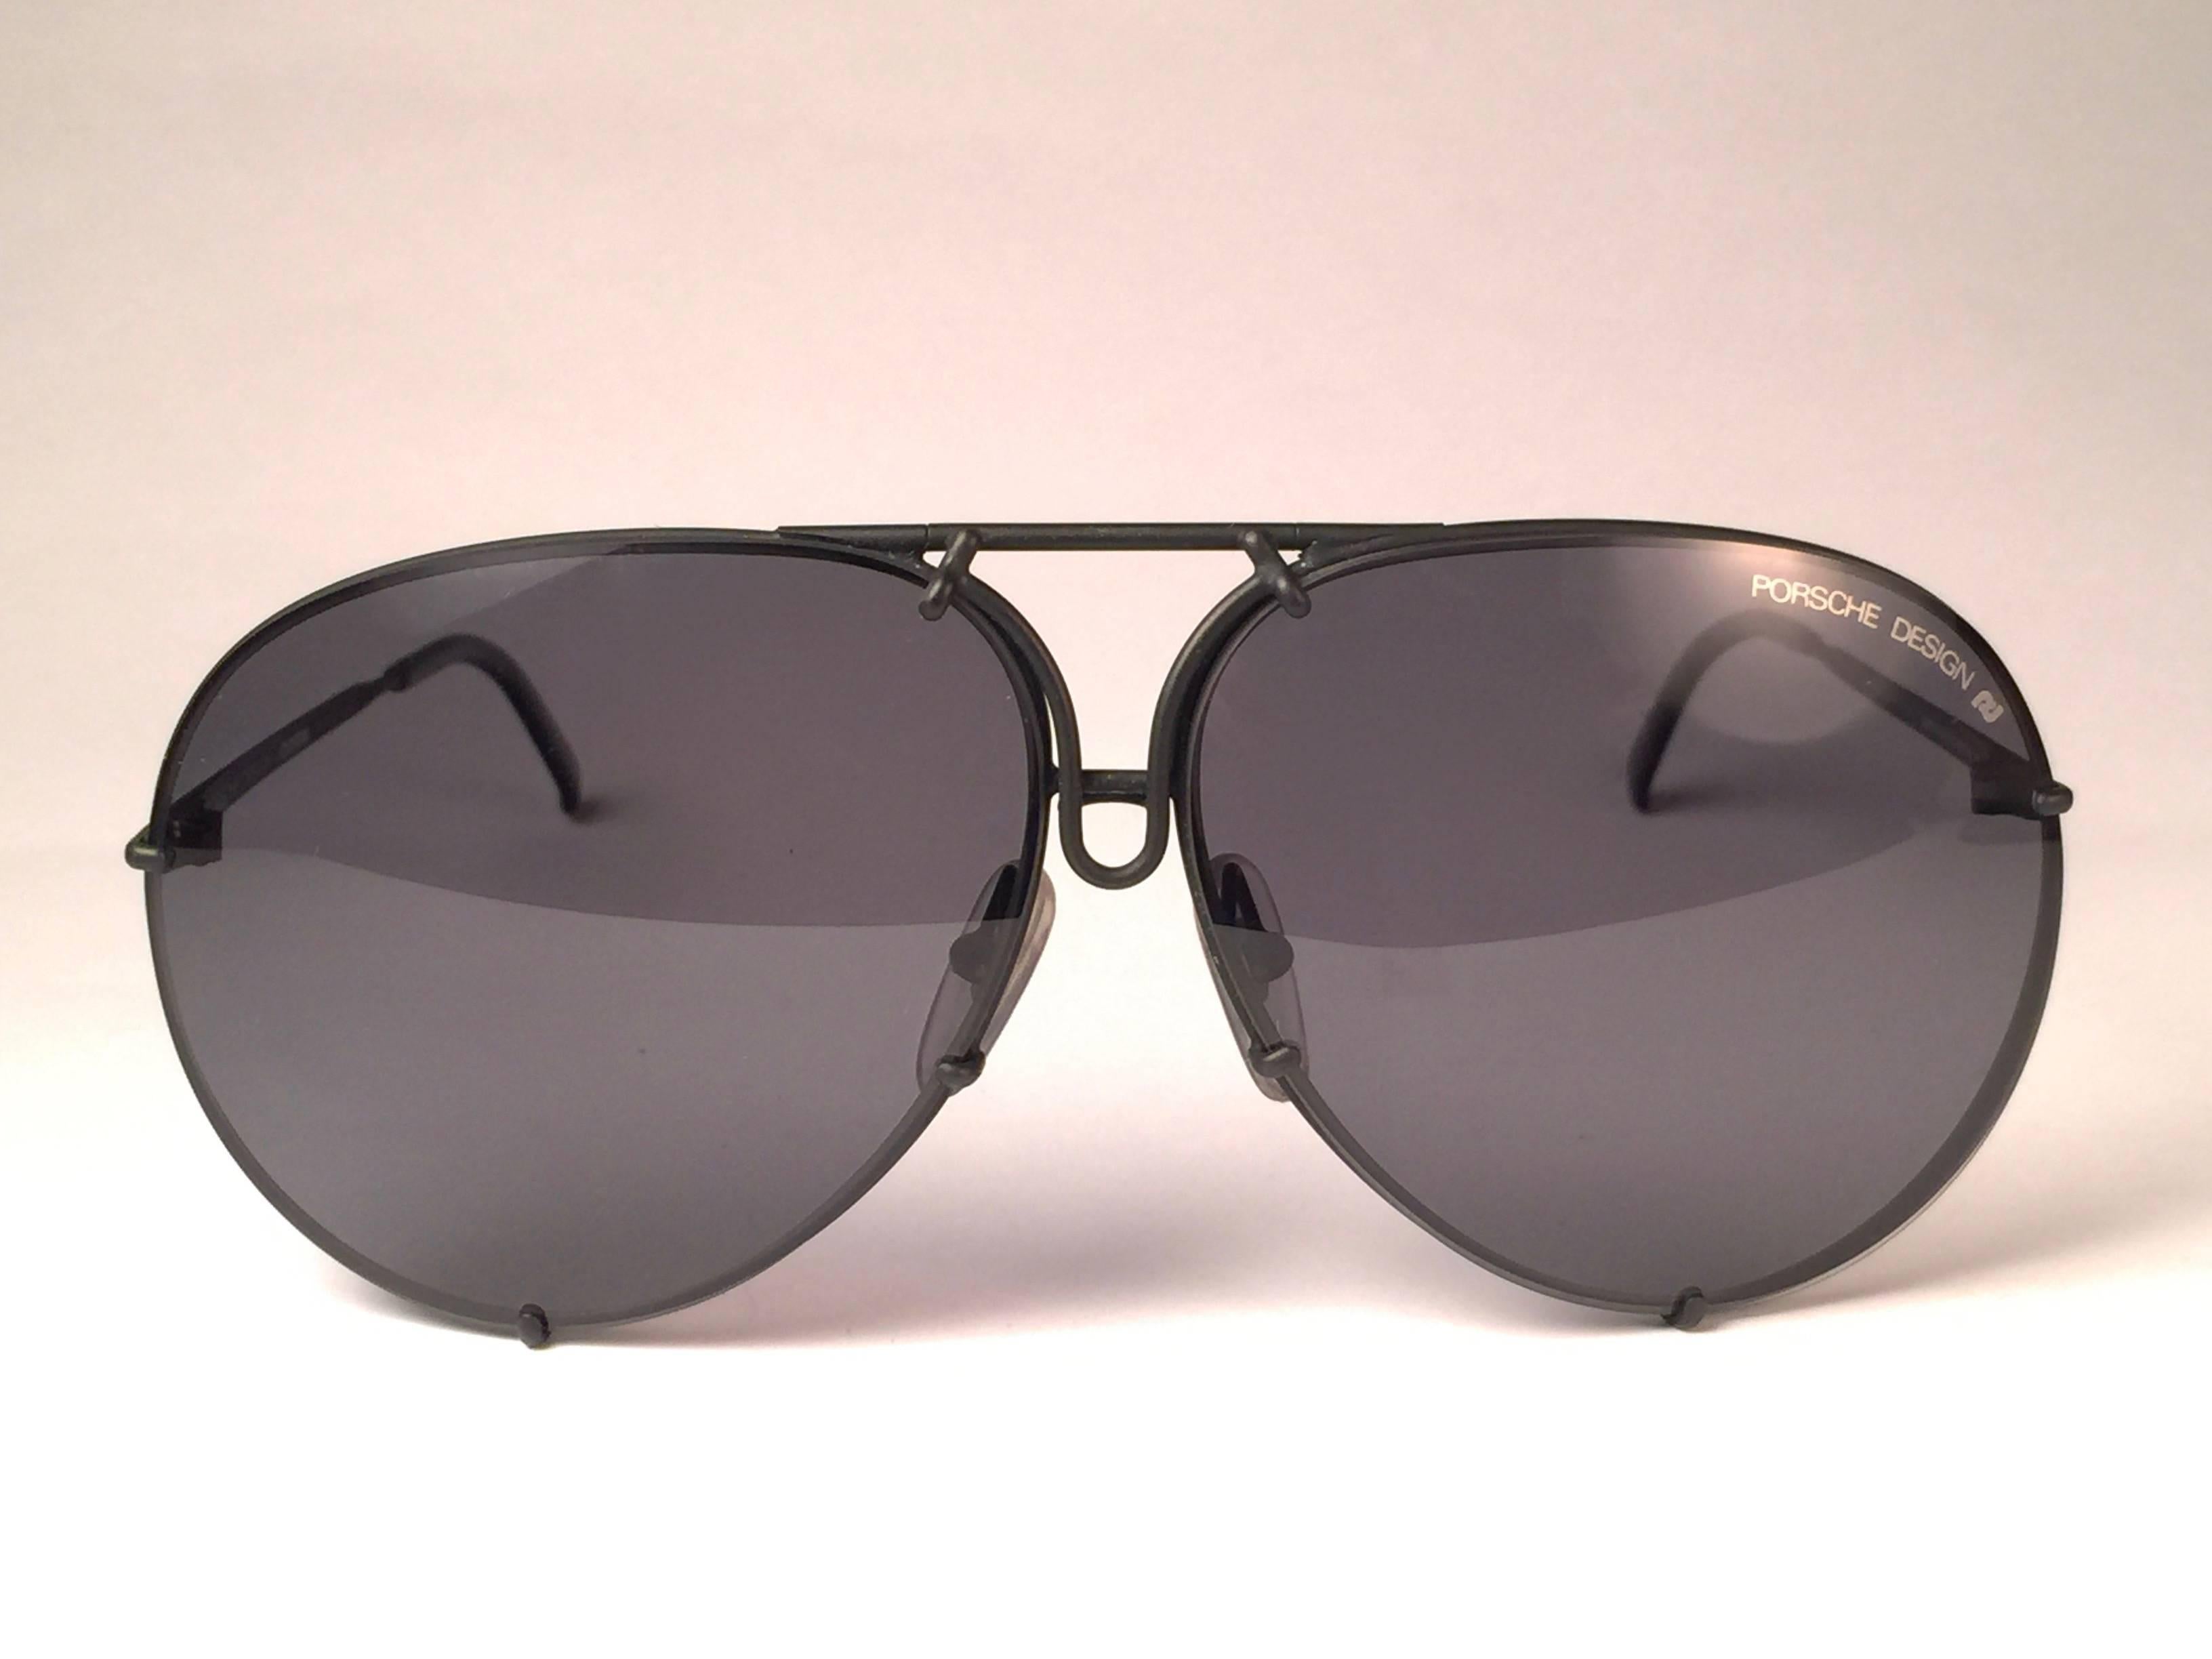 New 1980's Porsche Design 5623 black Matte frame with grey lenses. 
Amazing craftsmanship and quality.  
Comes with the original black Porsche hard case thats has some wear on it due to nearly 40 years of storage.
There is no extra set of lenses for